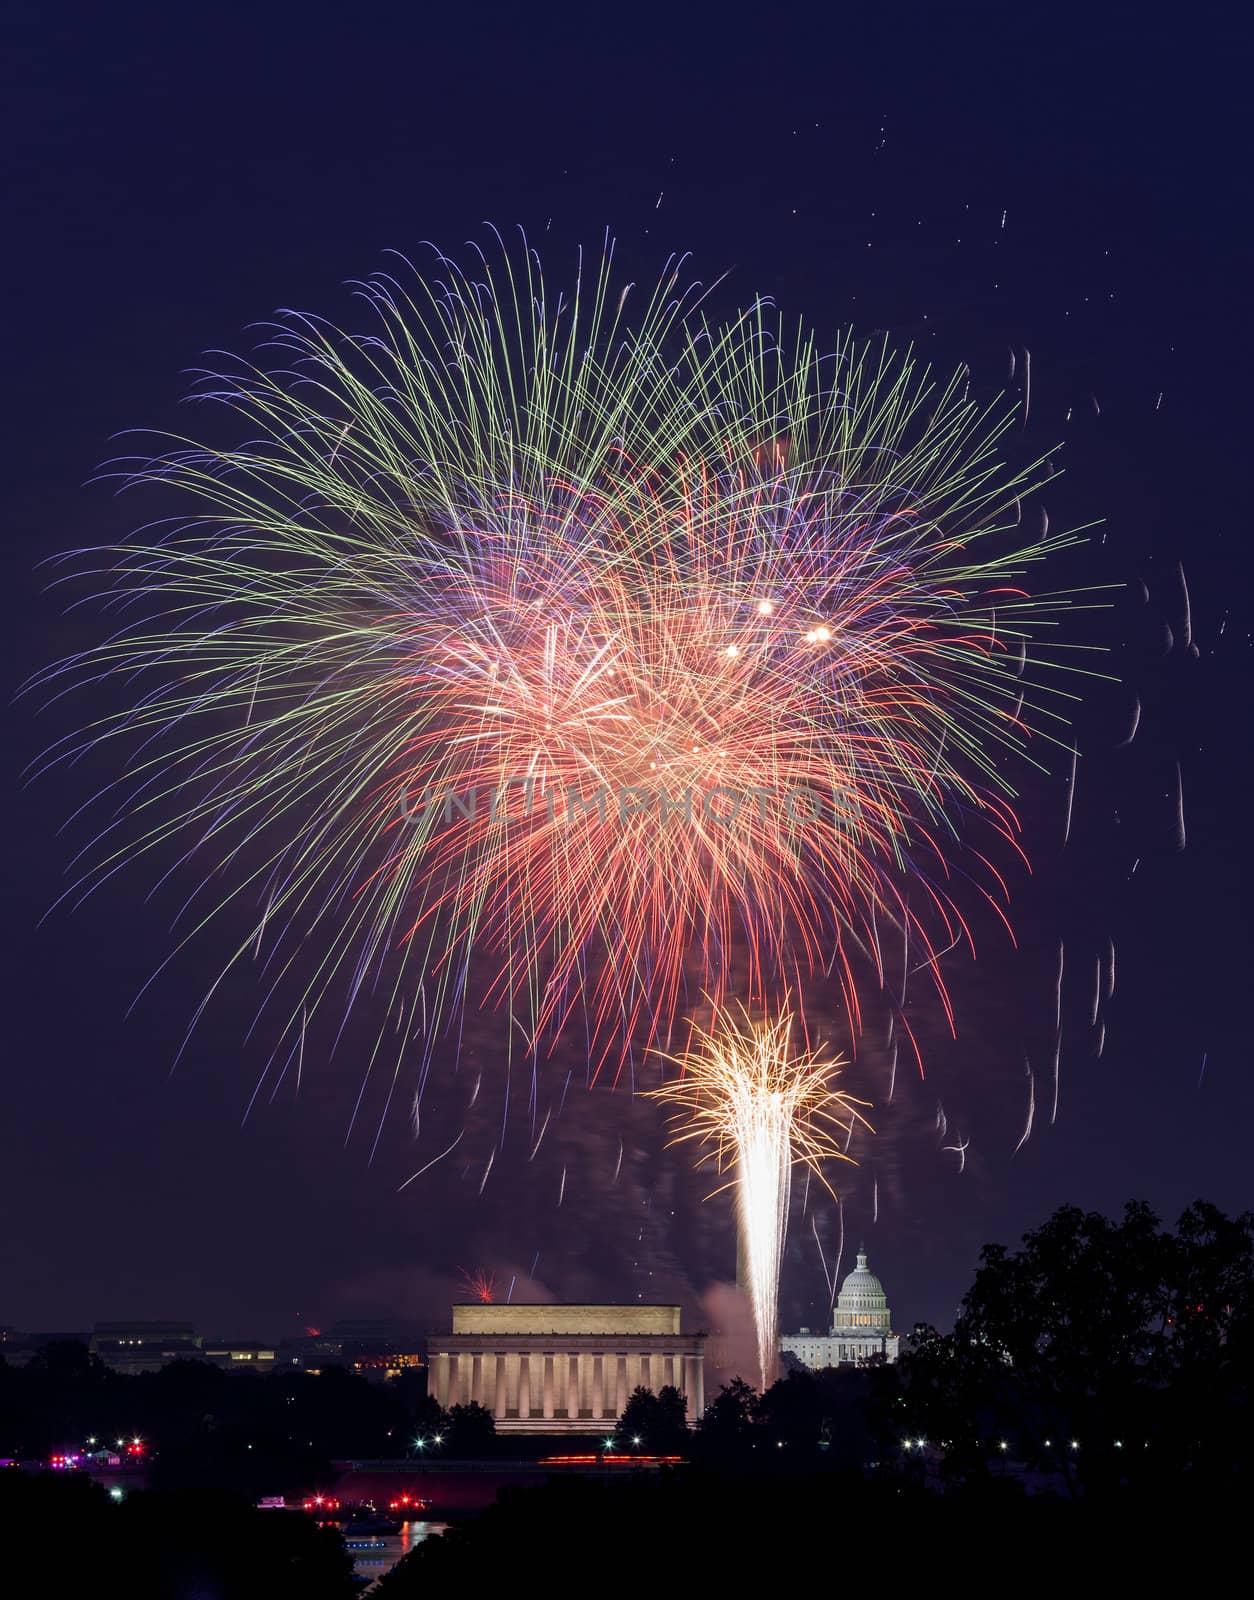 Fireworks over Washington DC on July 4th by steheap